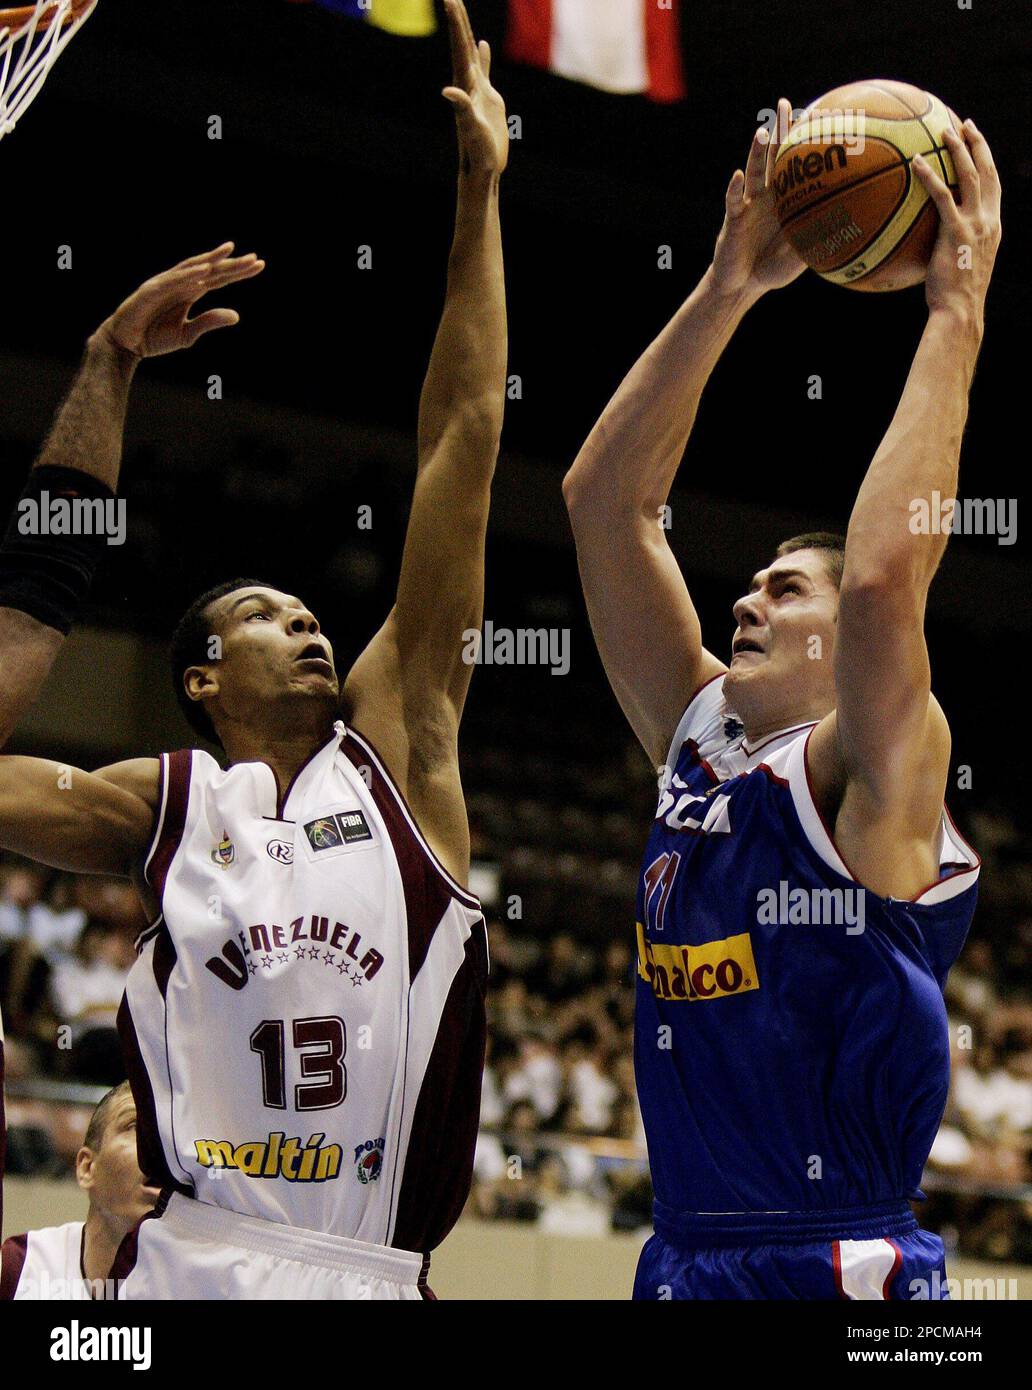 Serbia and Montenegro's Darko Milicic, right, of the NBA Detroit Pistons,  challenges for the ball with Latvia's players during their preliminary  round basketball match, at European Championship for Men, Eurobasket 2005,  in